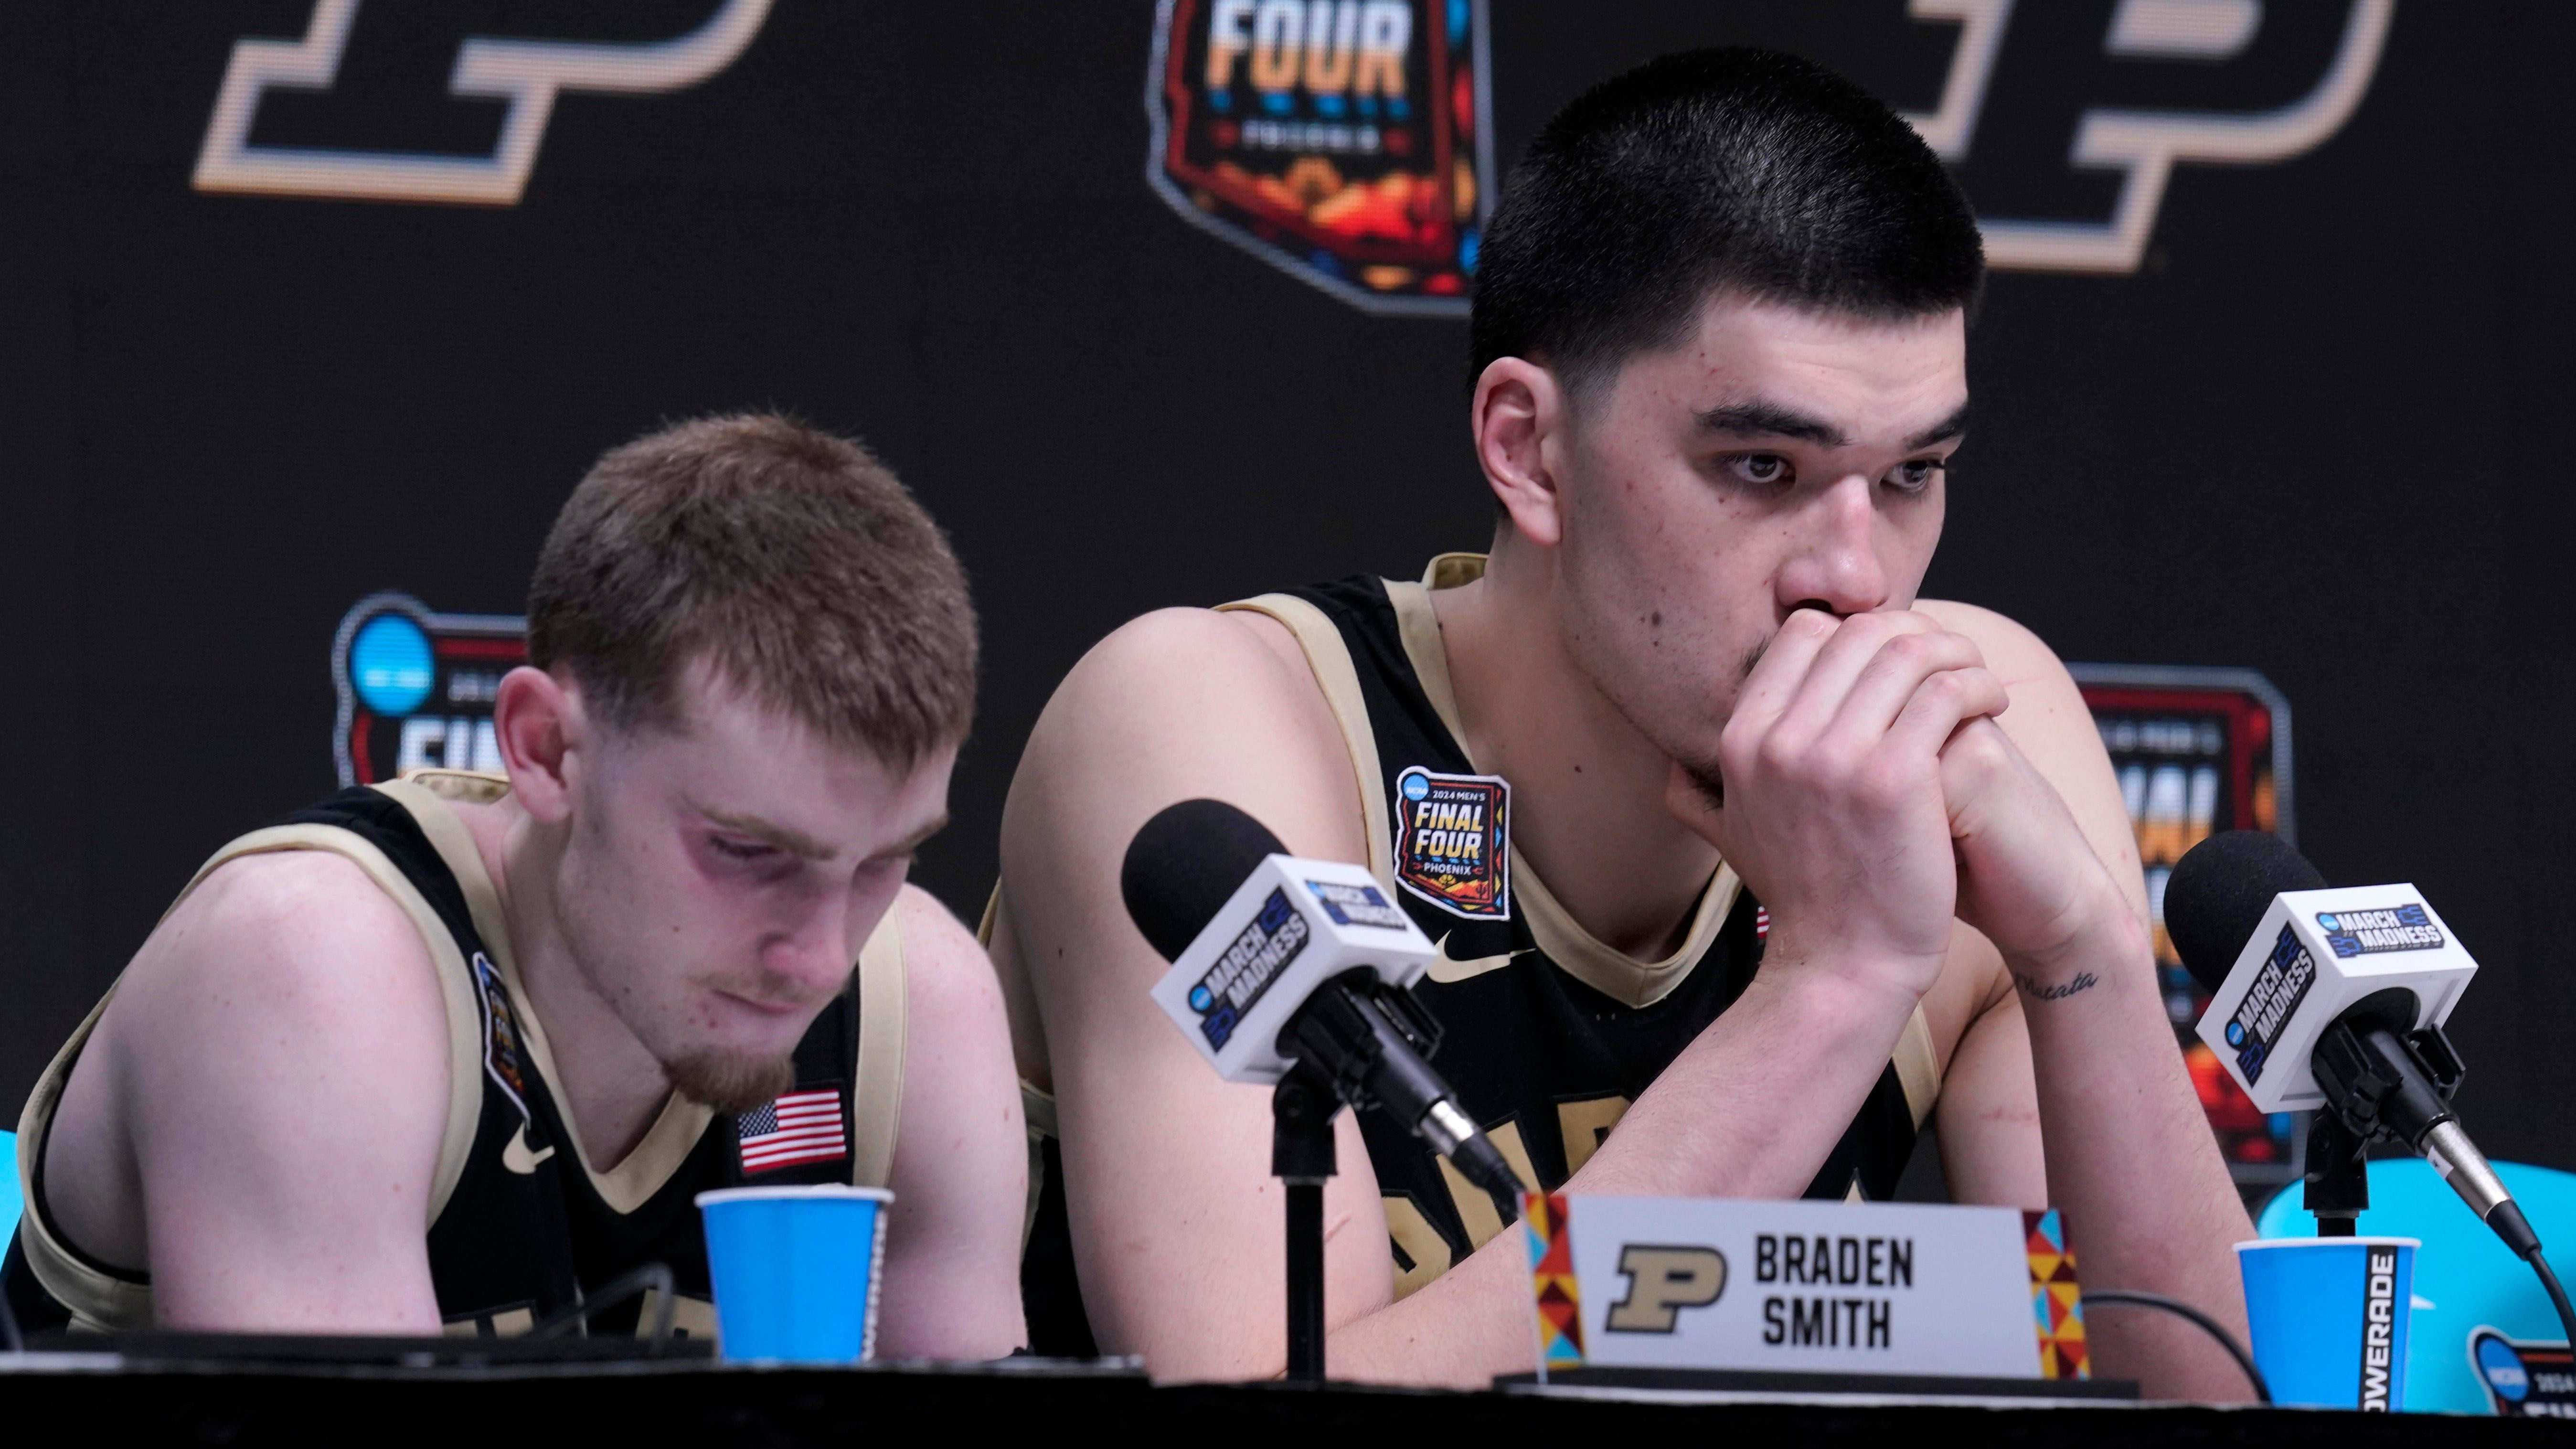 What Braden Smith, Zach Edey said after Purdue's loss to UConn